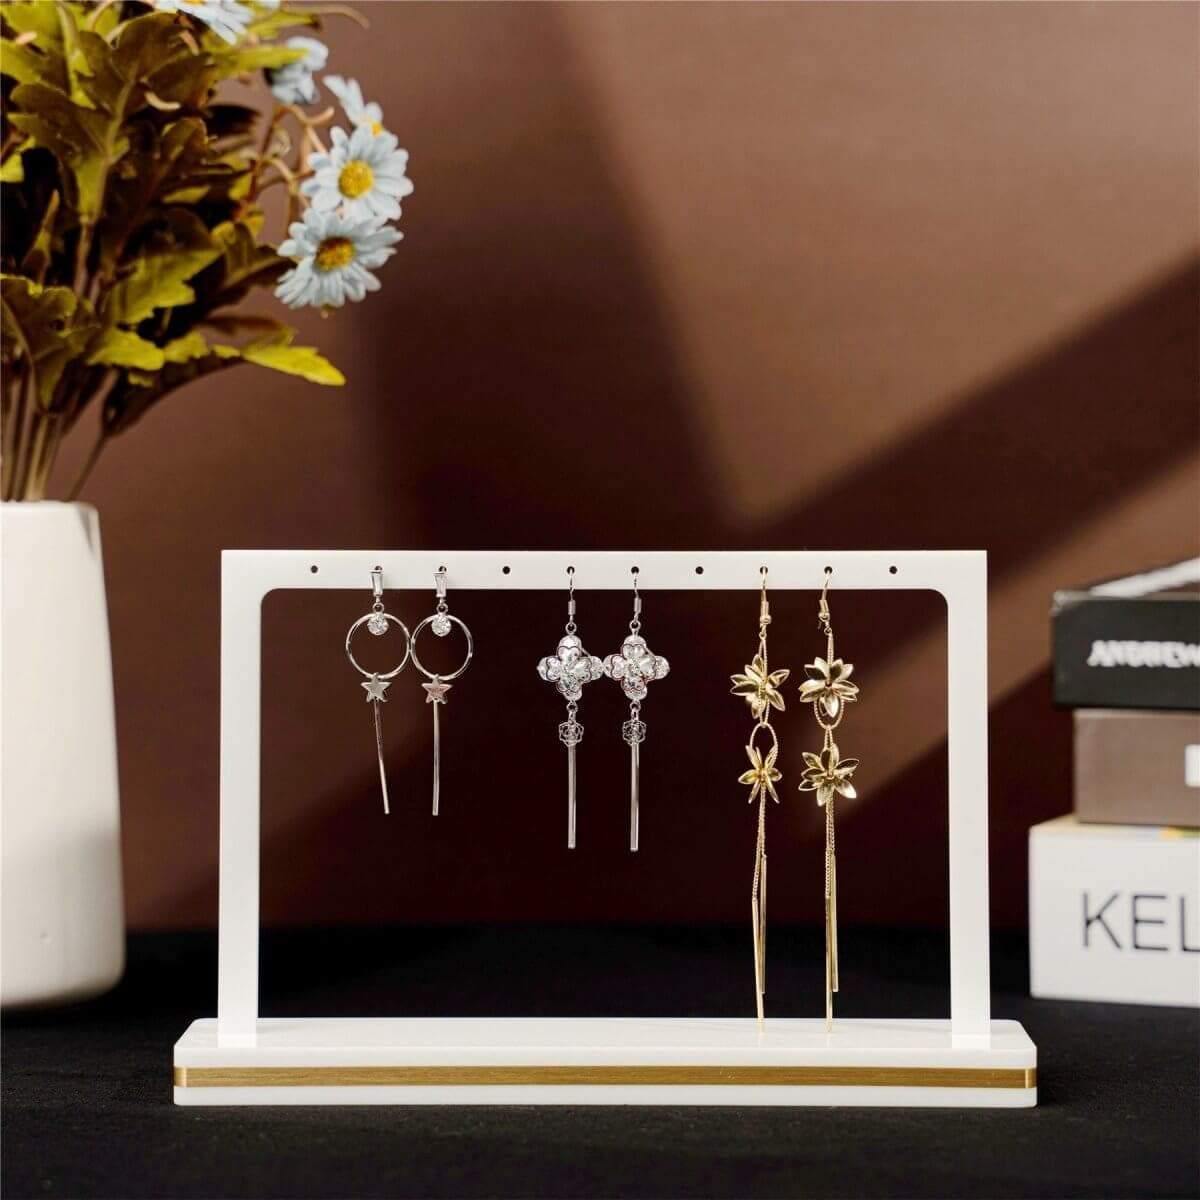 acrylic earring display stand earring display earring display stand Elitnus Acrylic Earring Display Stand - 2 Pack White Acrylic Earring Organizer - T Bar Earring Stands for Shows YIFU DISPLAY